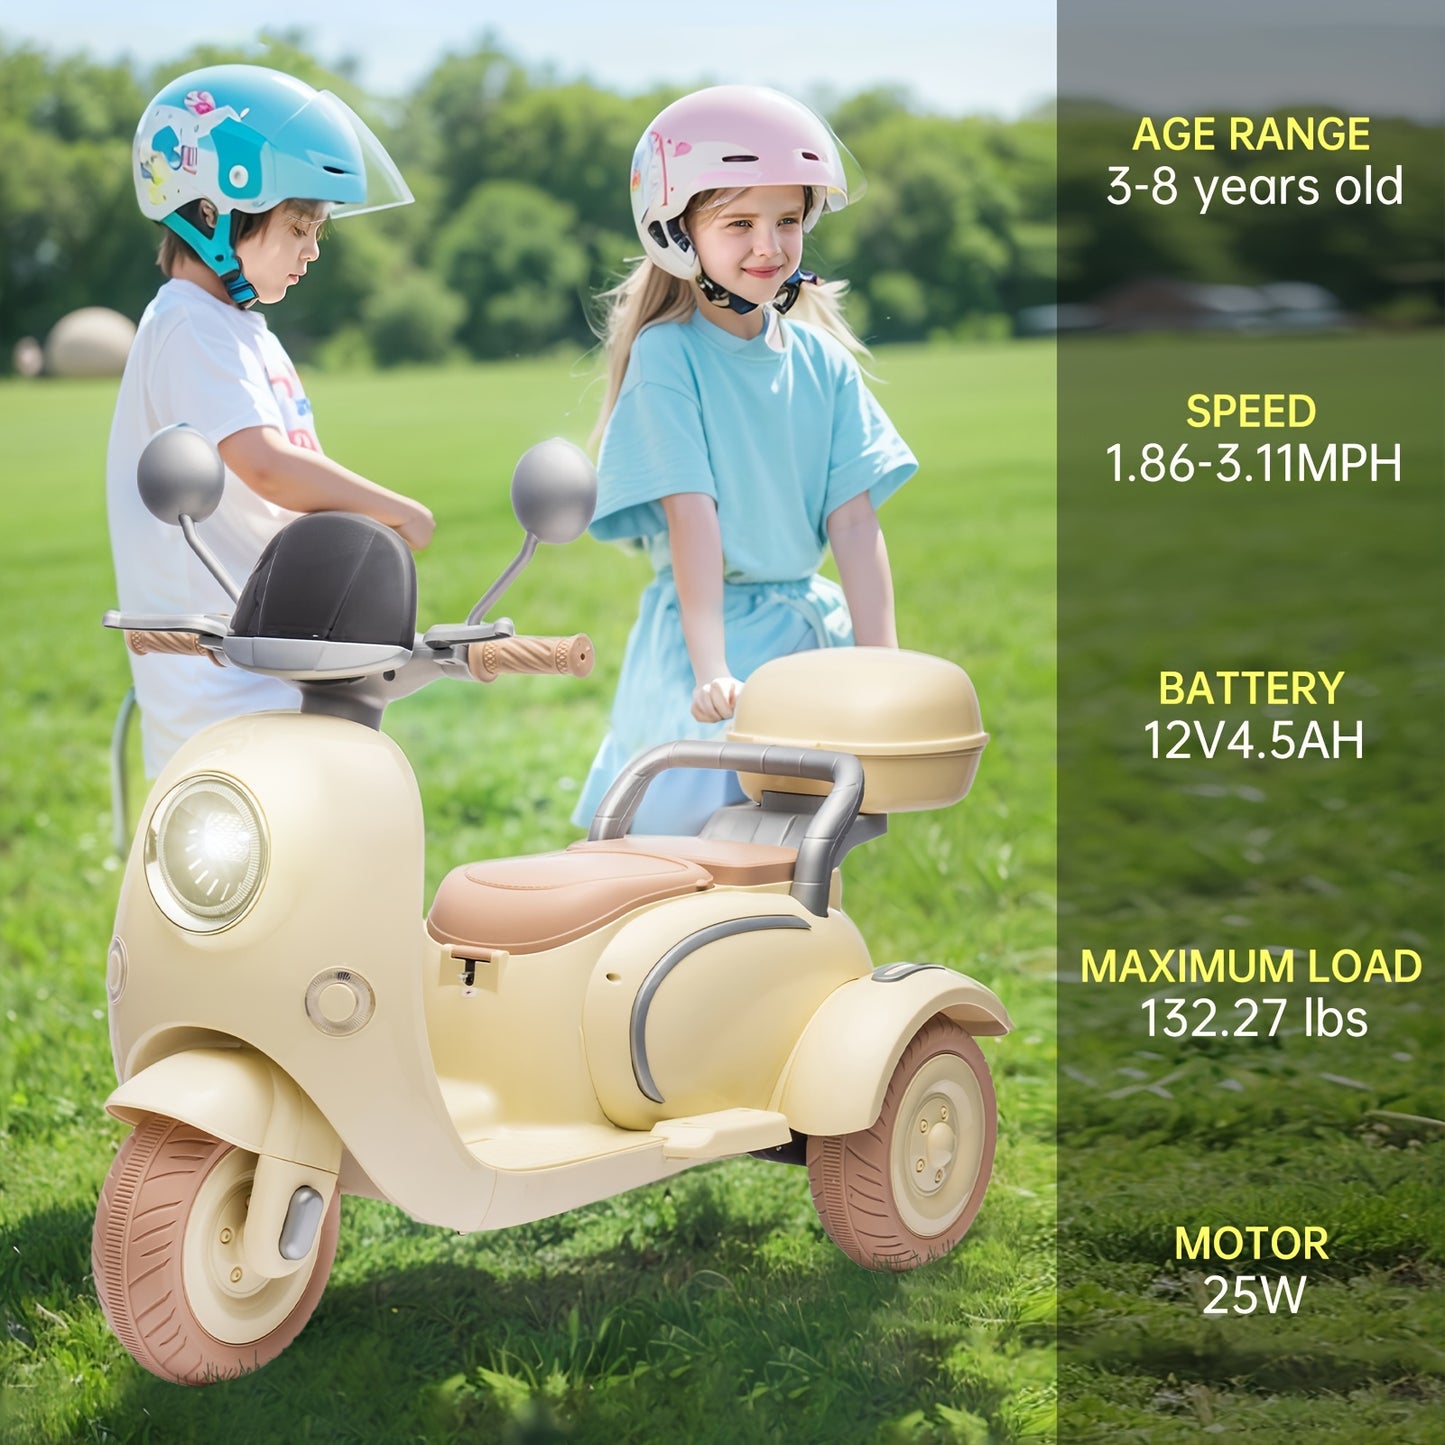 12v cute baby tricycle first launched cute two-seater children's electric motorcycle three-wheeled children's toy with slow start multi-function player light USB super large storage box Bee's to Find